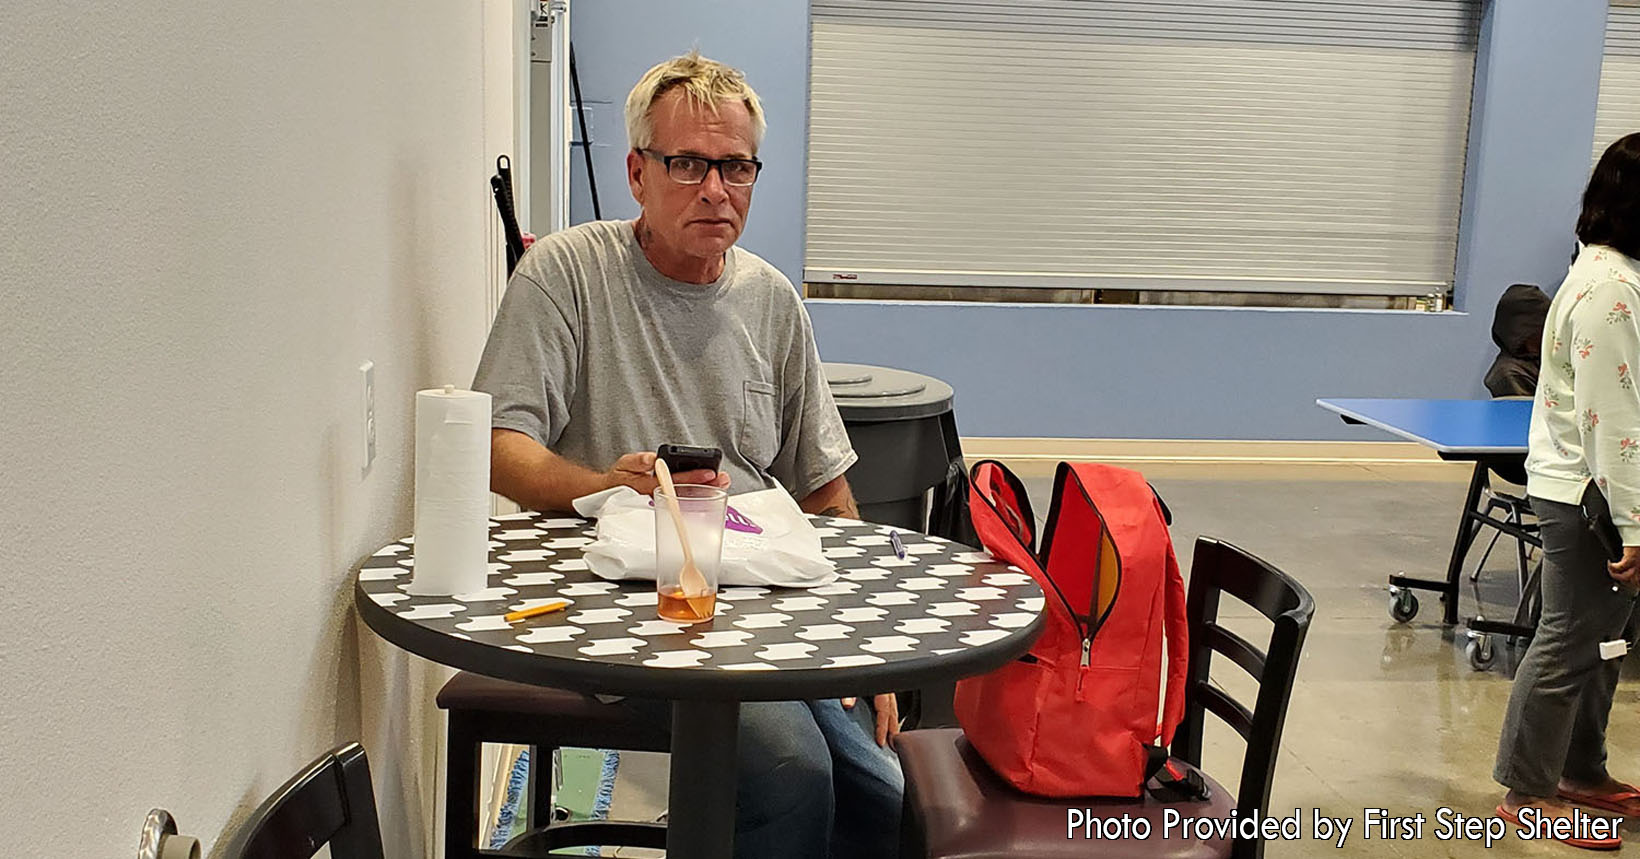 This older gentleman has just finished eating his dinner. During this time, he is checking his cellphone to see if any job offers have come his way. Volunteers of the First Step Shelter help the residents create better resumes and apply for jobs.